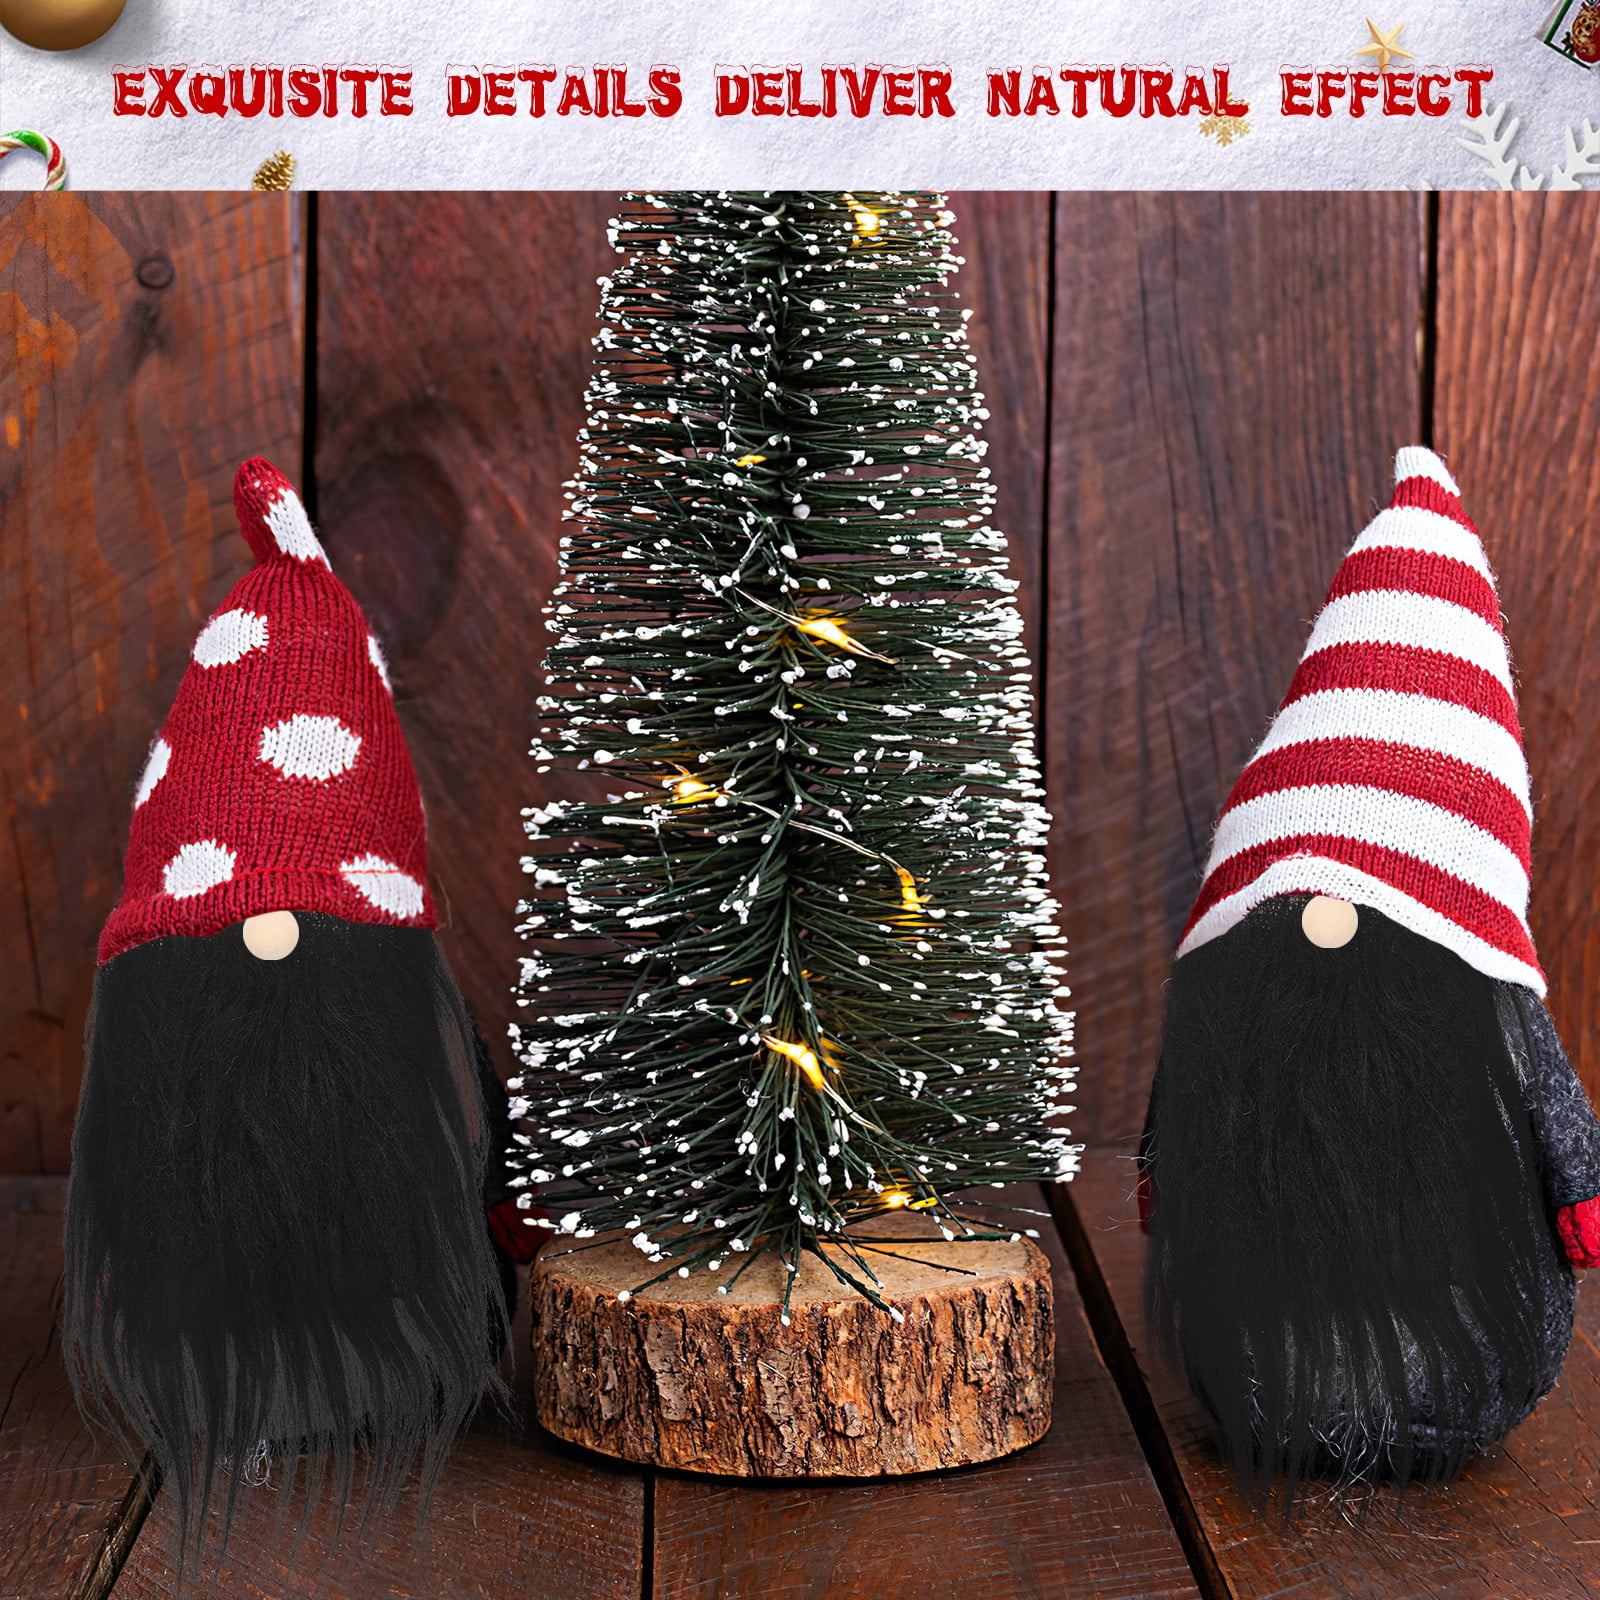 Home decoration Gnome Beard with Wood Balls for Crafting 24Pcs/Set Pre-cut  DIY Decor Solid Color Faux Fur Beards for Christmas Gnome Dolls